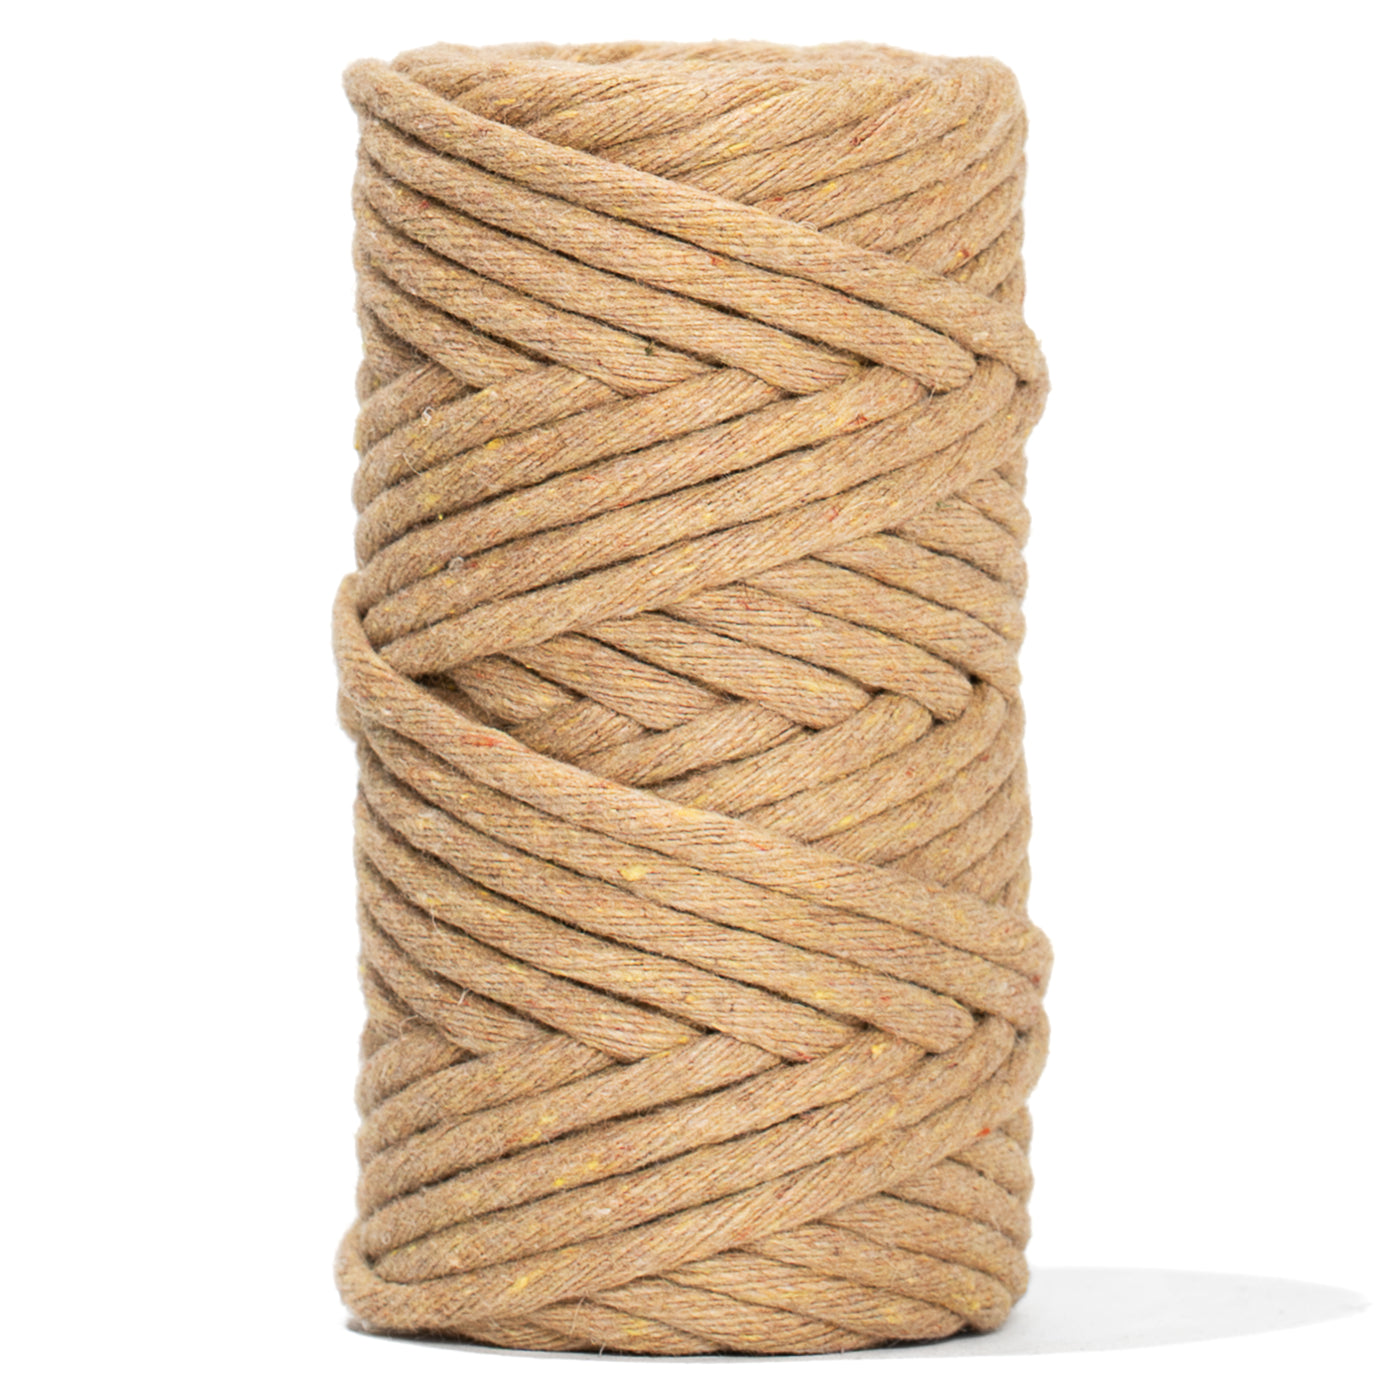 MACRAME SOFT COTTON CORD RECYCLED 4 MM - 1 SINGLE STRAND - TOAST COLOR  GANXXET